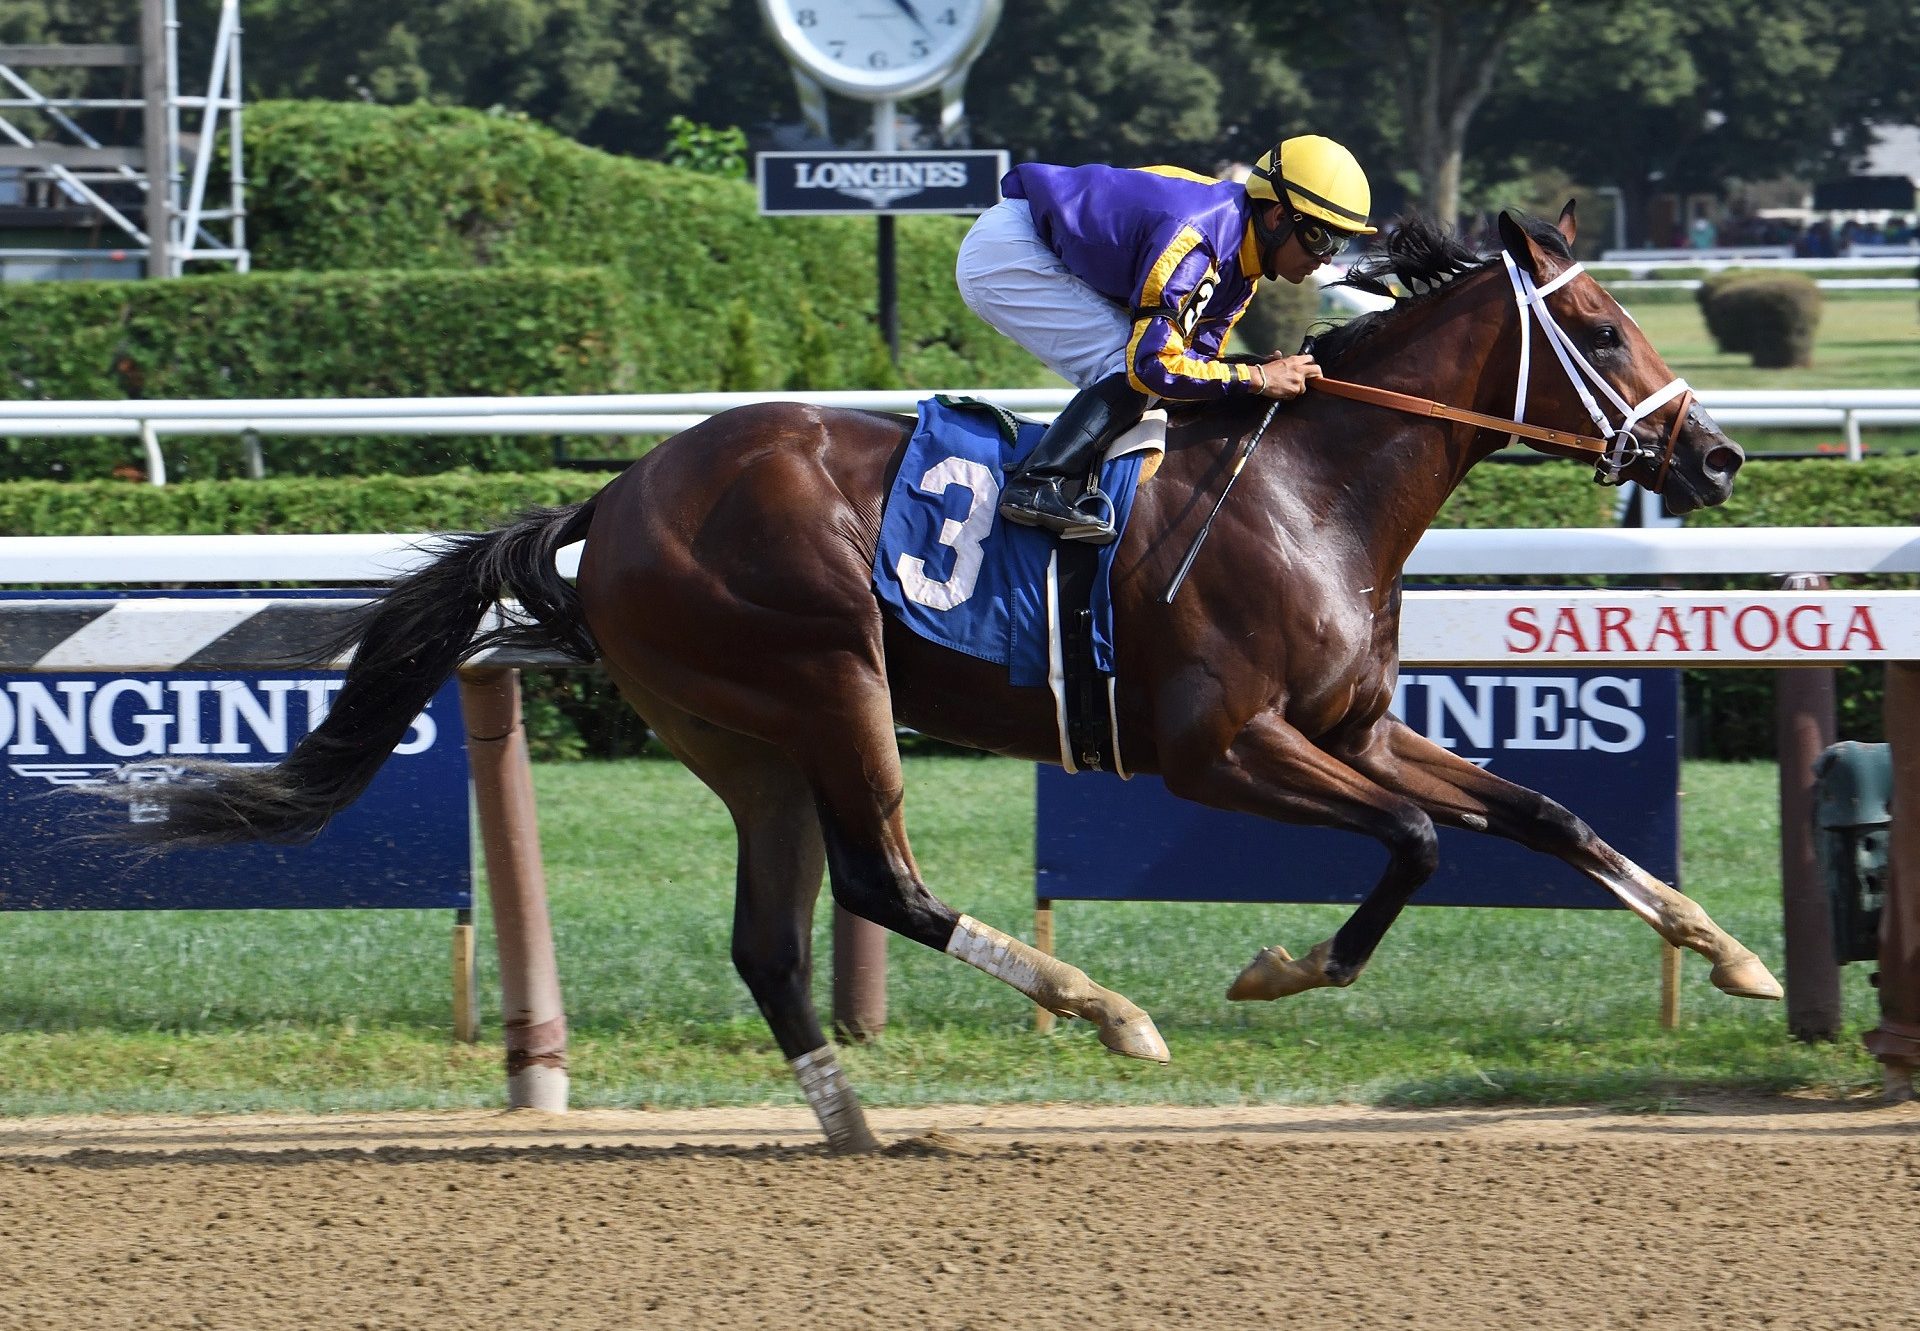 American Butterfly (Saratoga) winning a MSW at Saratoga